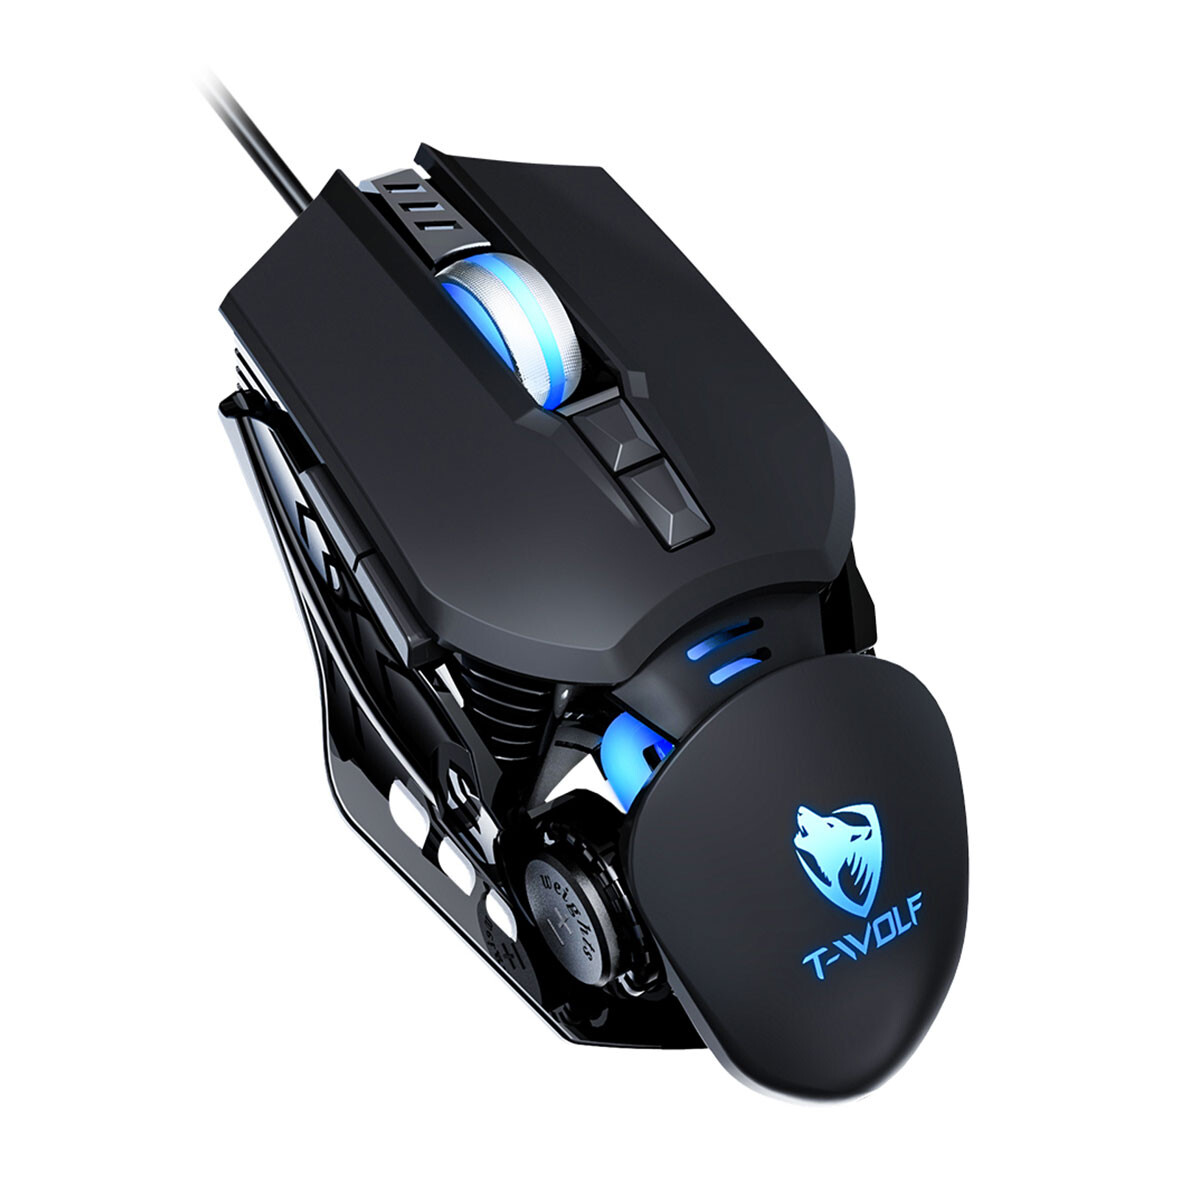 MOUSE GAMER CON CABLE TWOLF G530BK NEGRO 